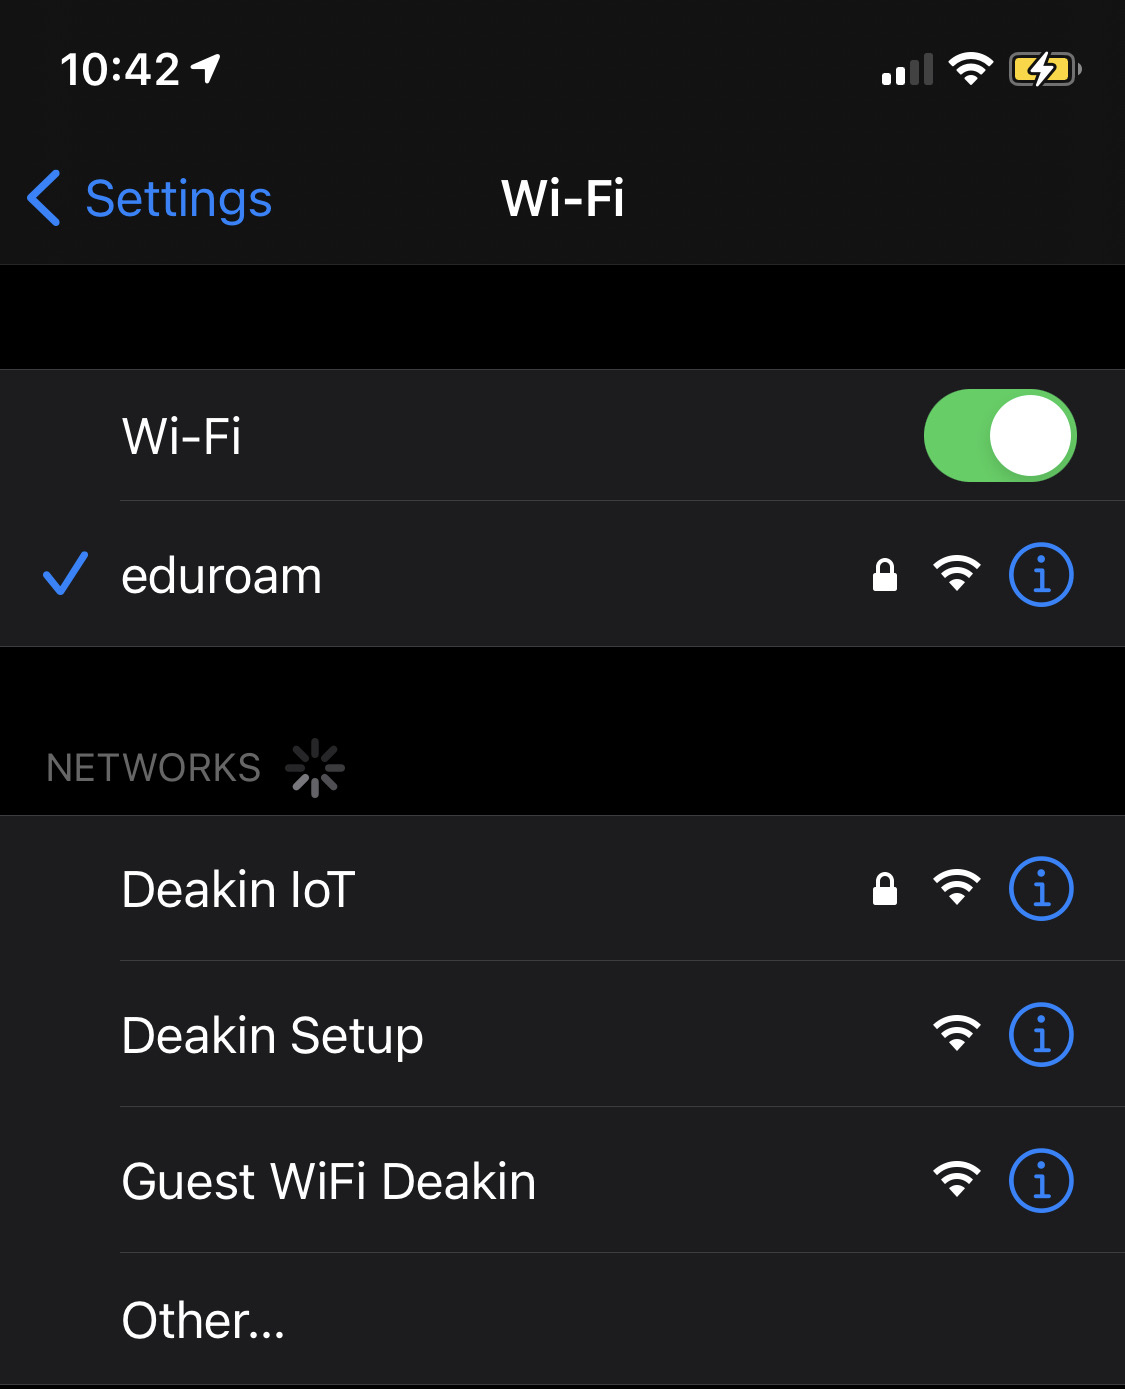 WiFi menu in the settings app, showing Wi-Fi toggled on and a tick next to eduroam indicating its connected